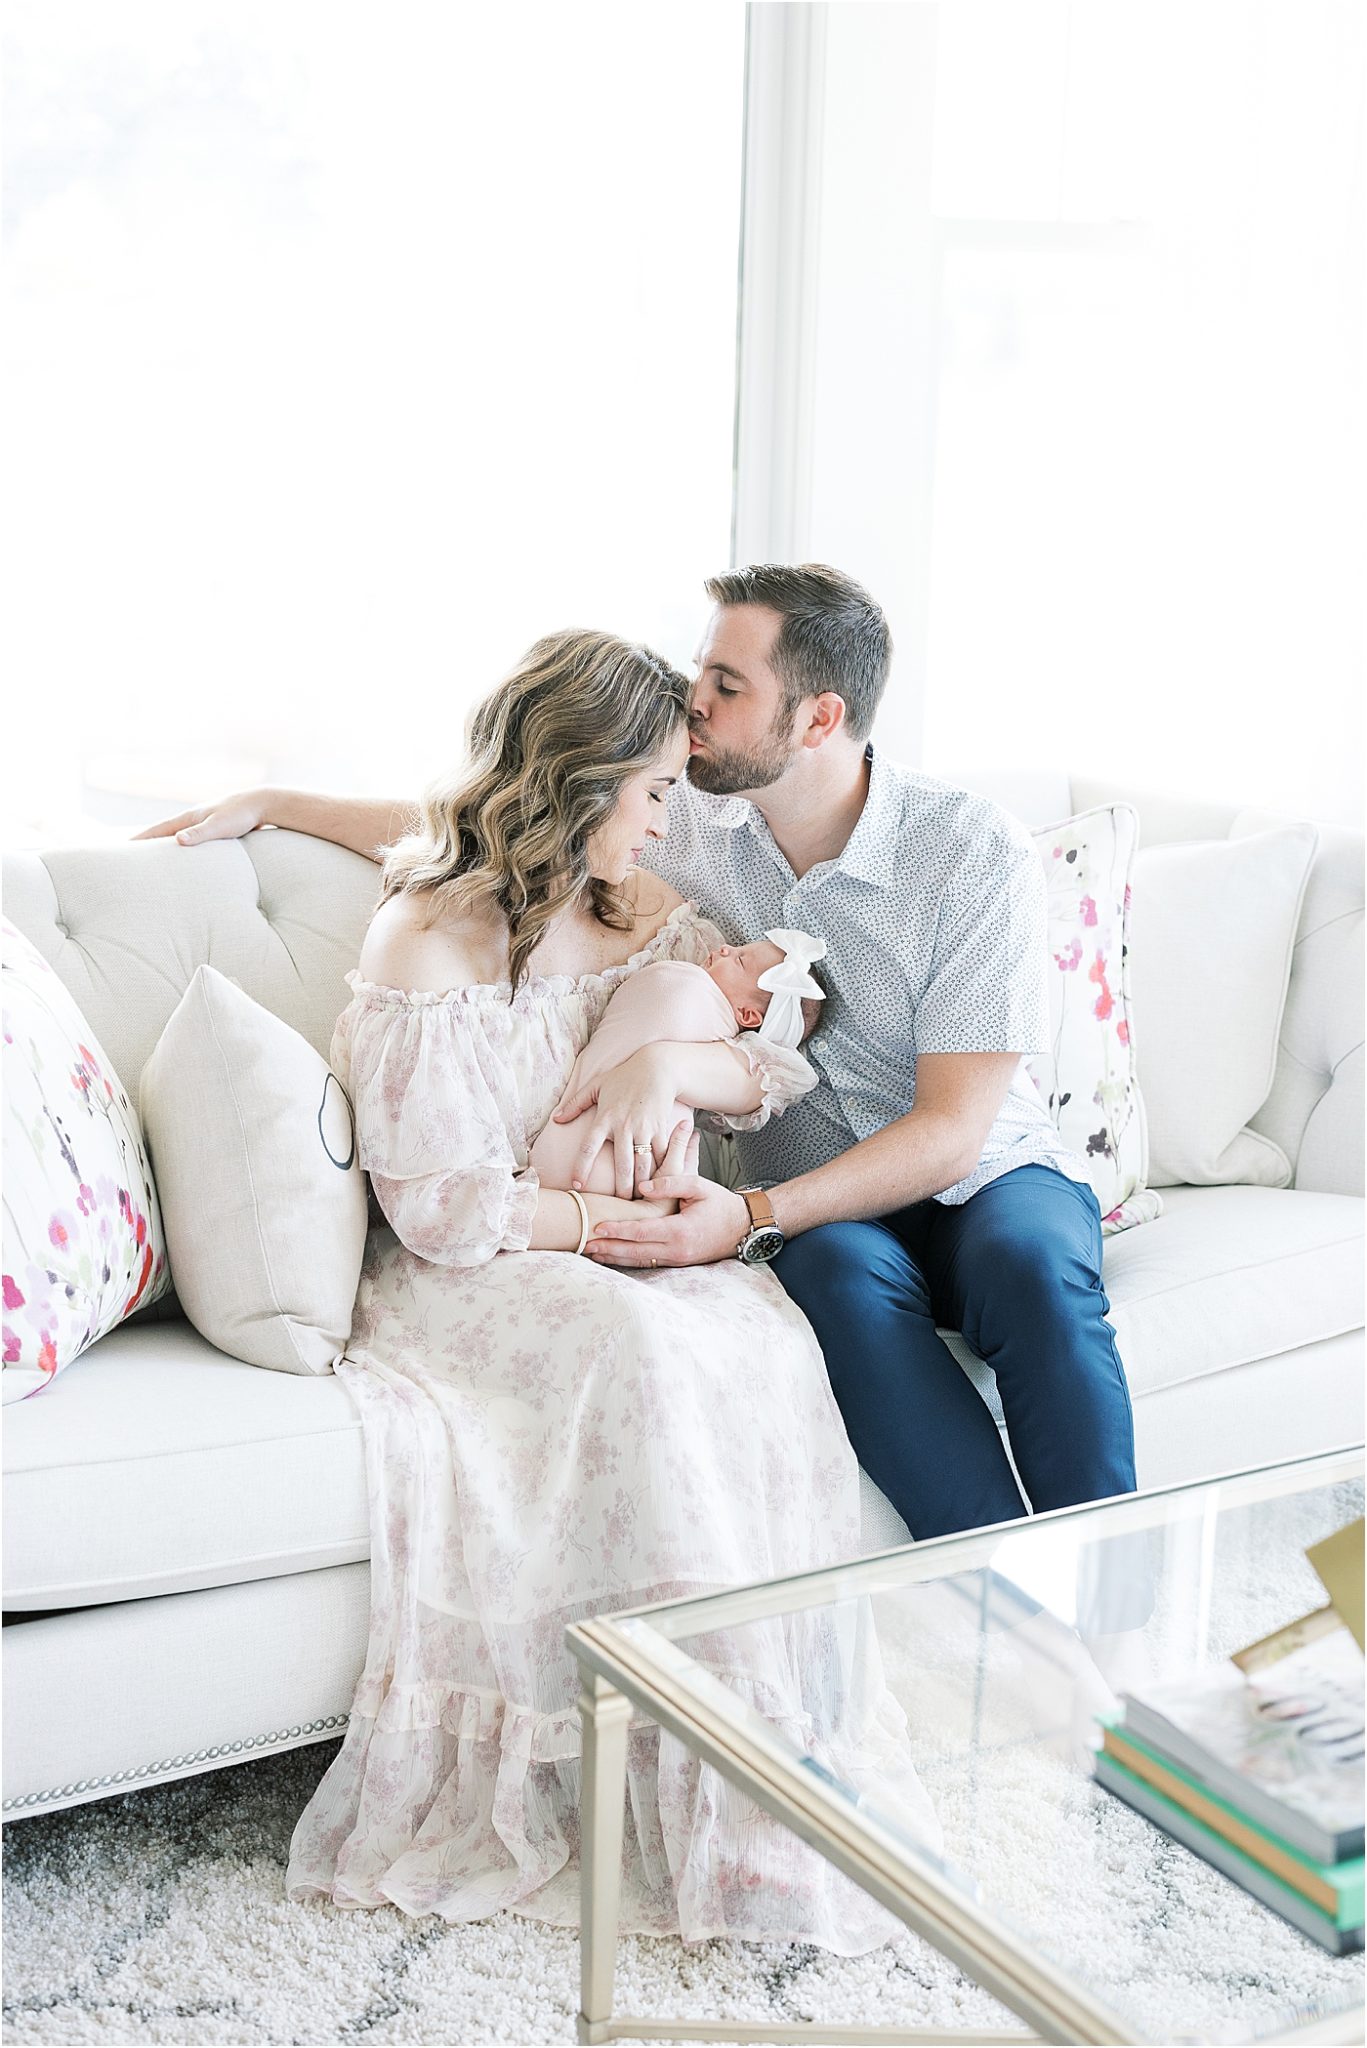 Baby girl newborn session photographed by Westfield newborn photographer, Lindsay Konopa Photography.